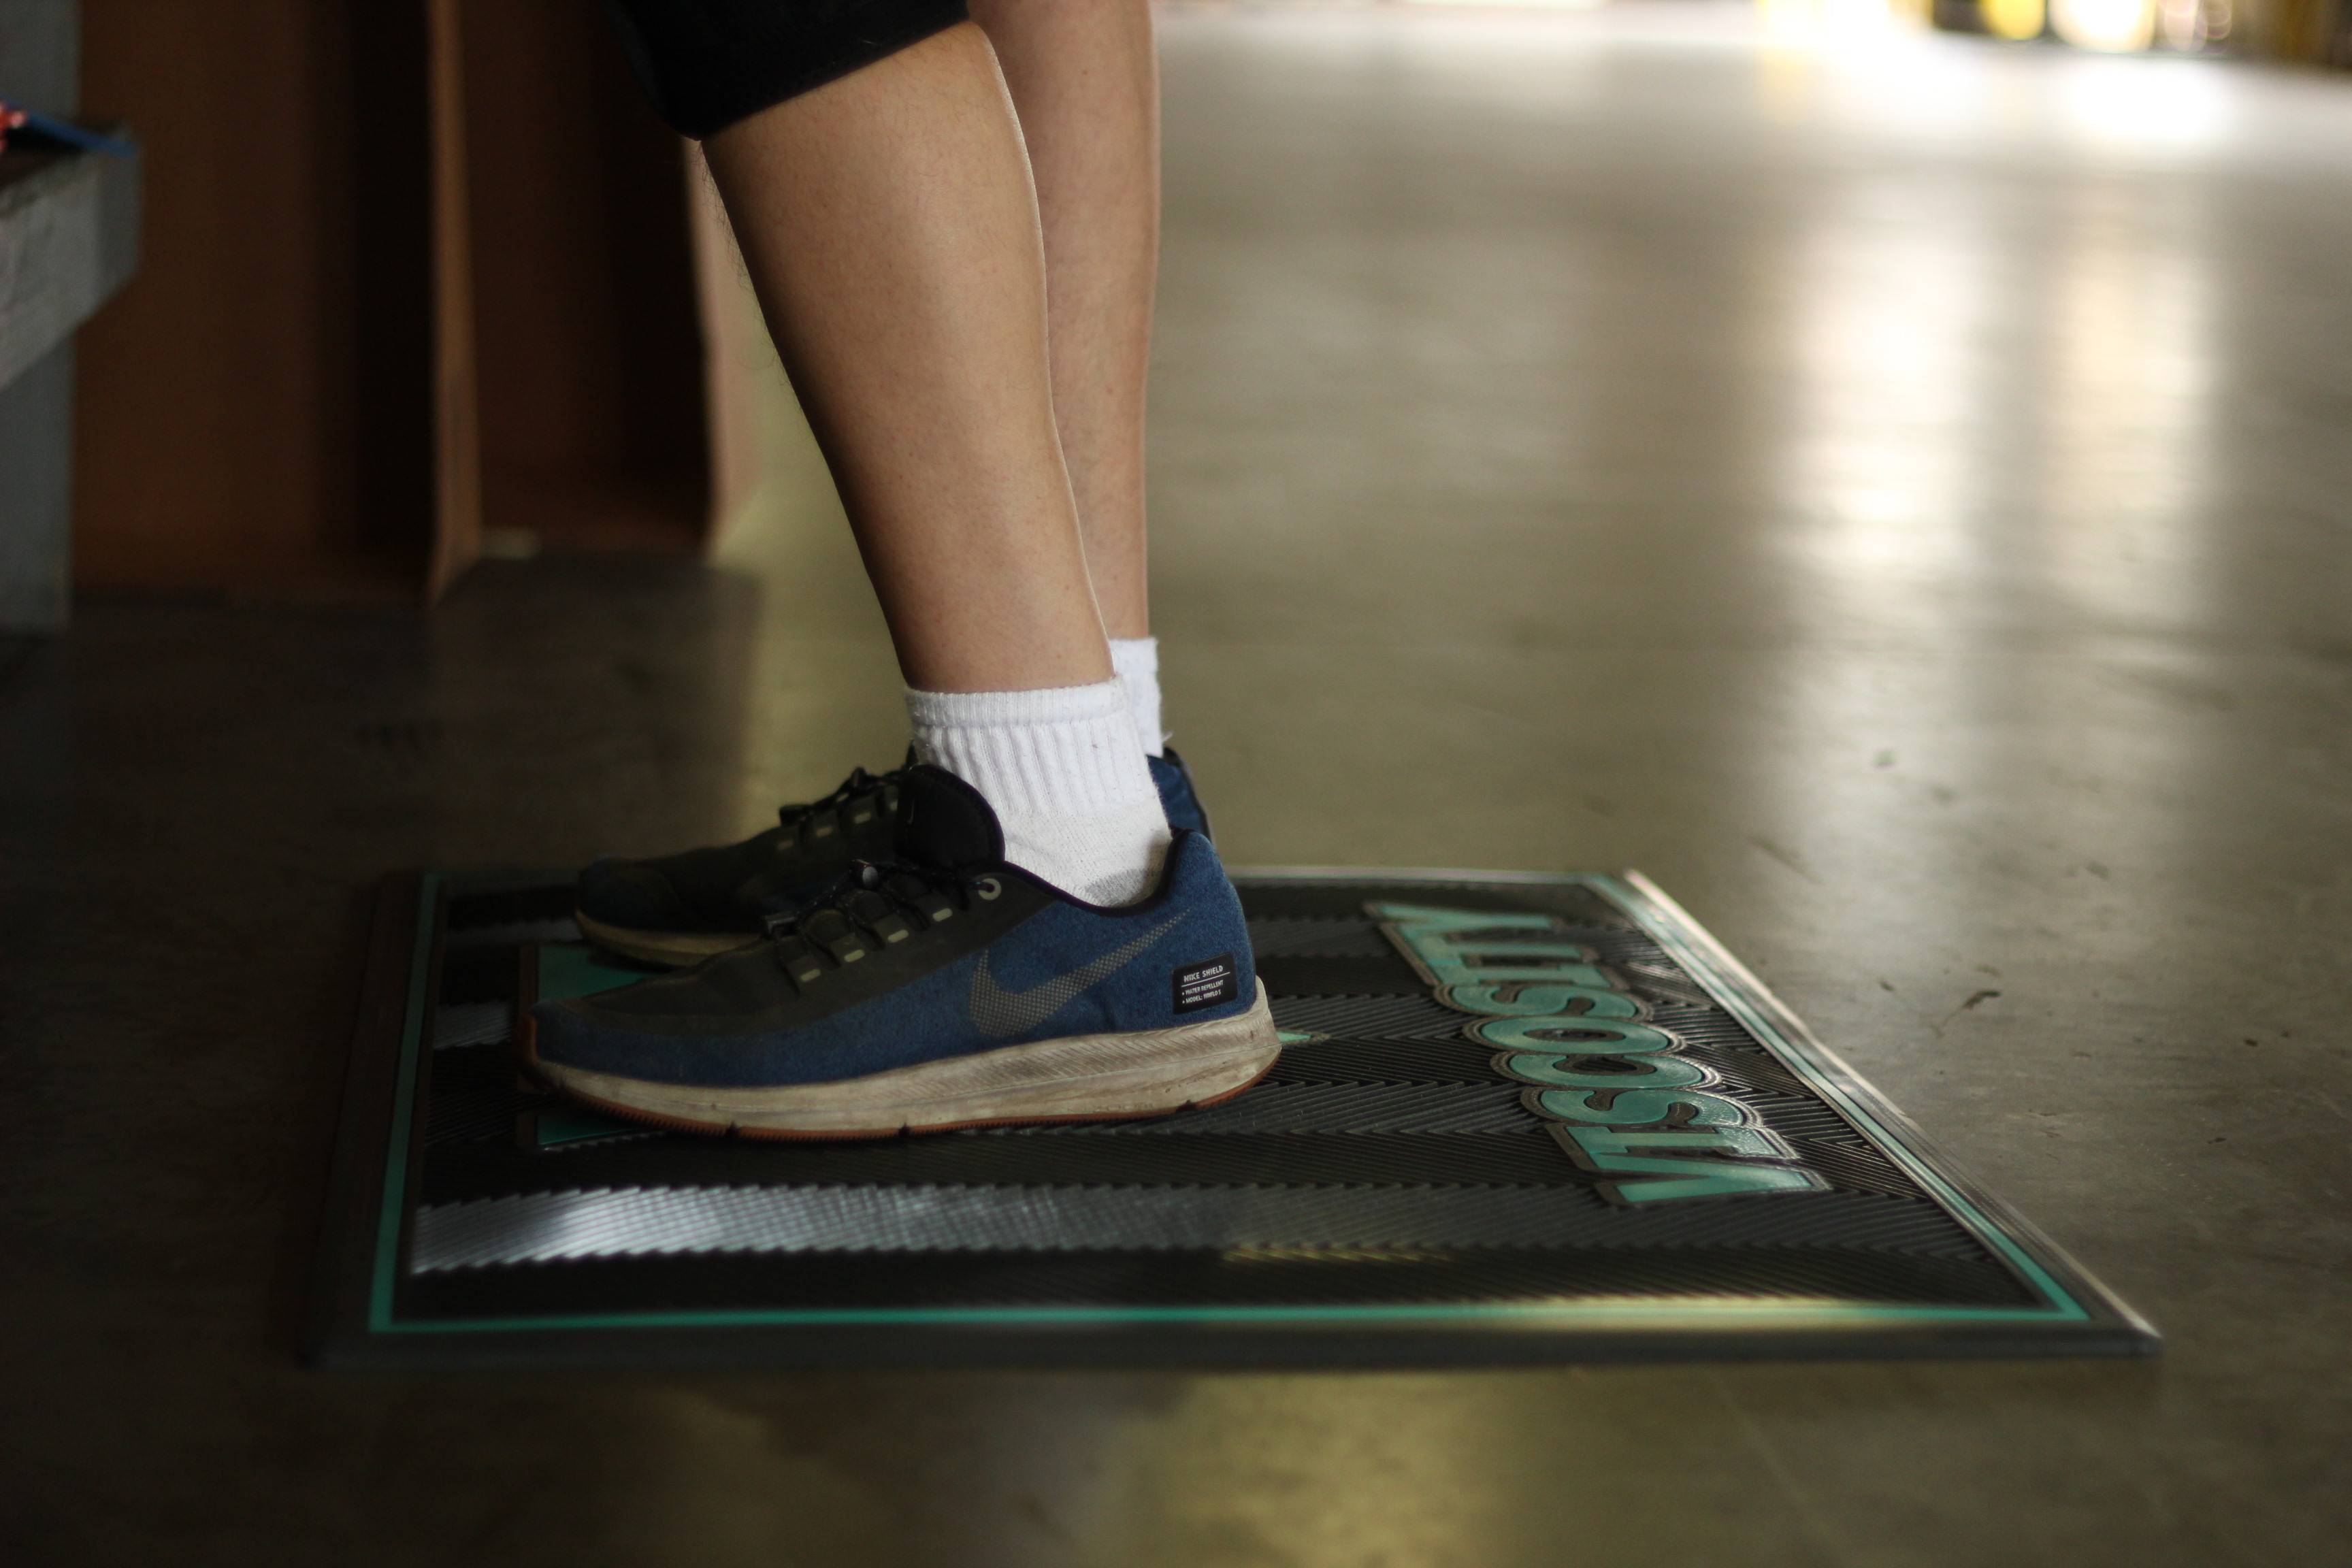 Molded Anti-Fatigue Floor Mat in Use 1